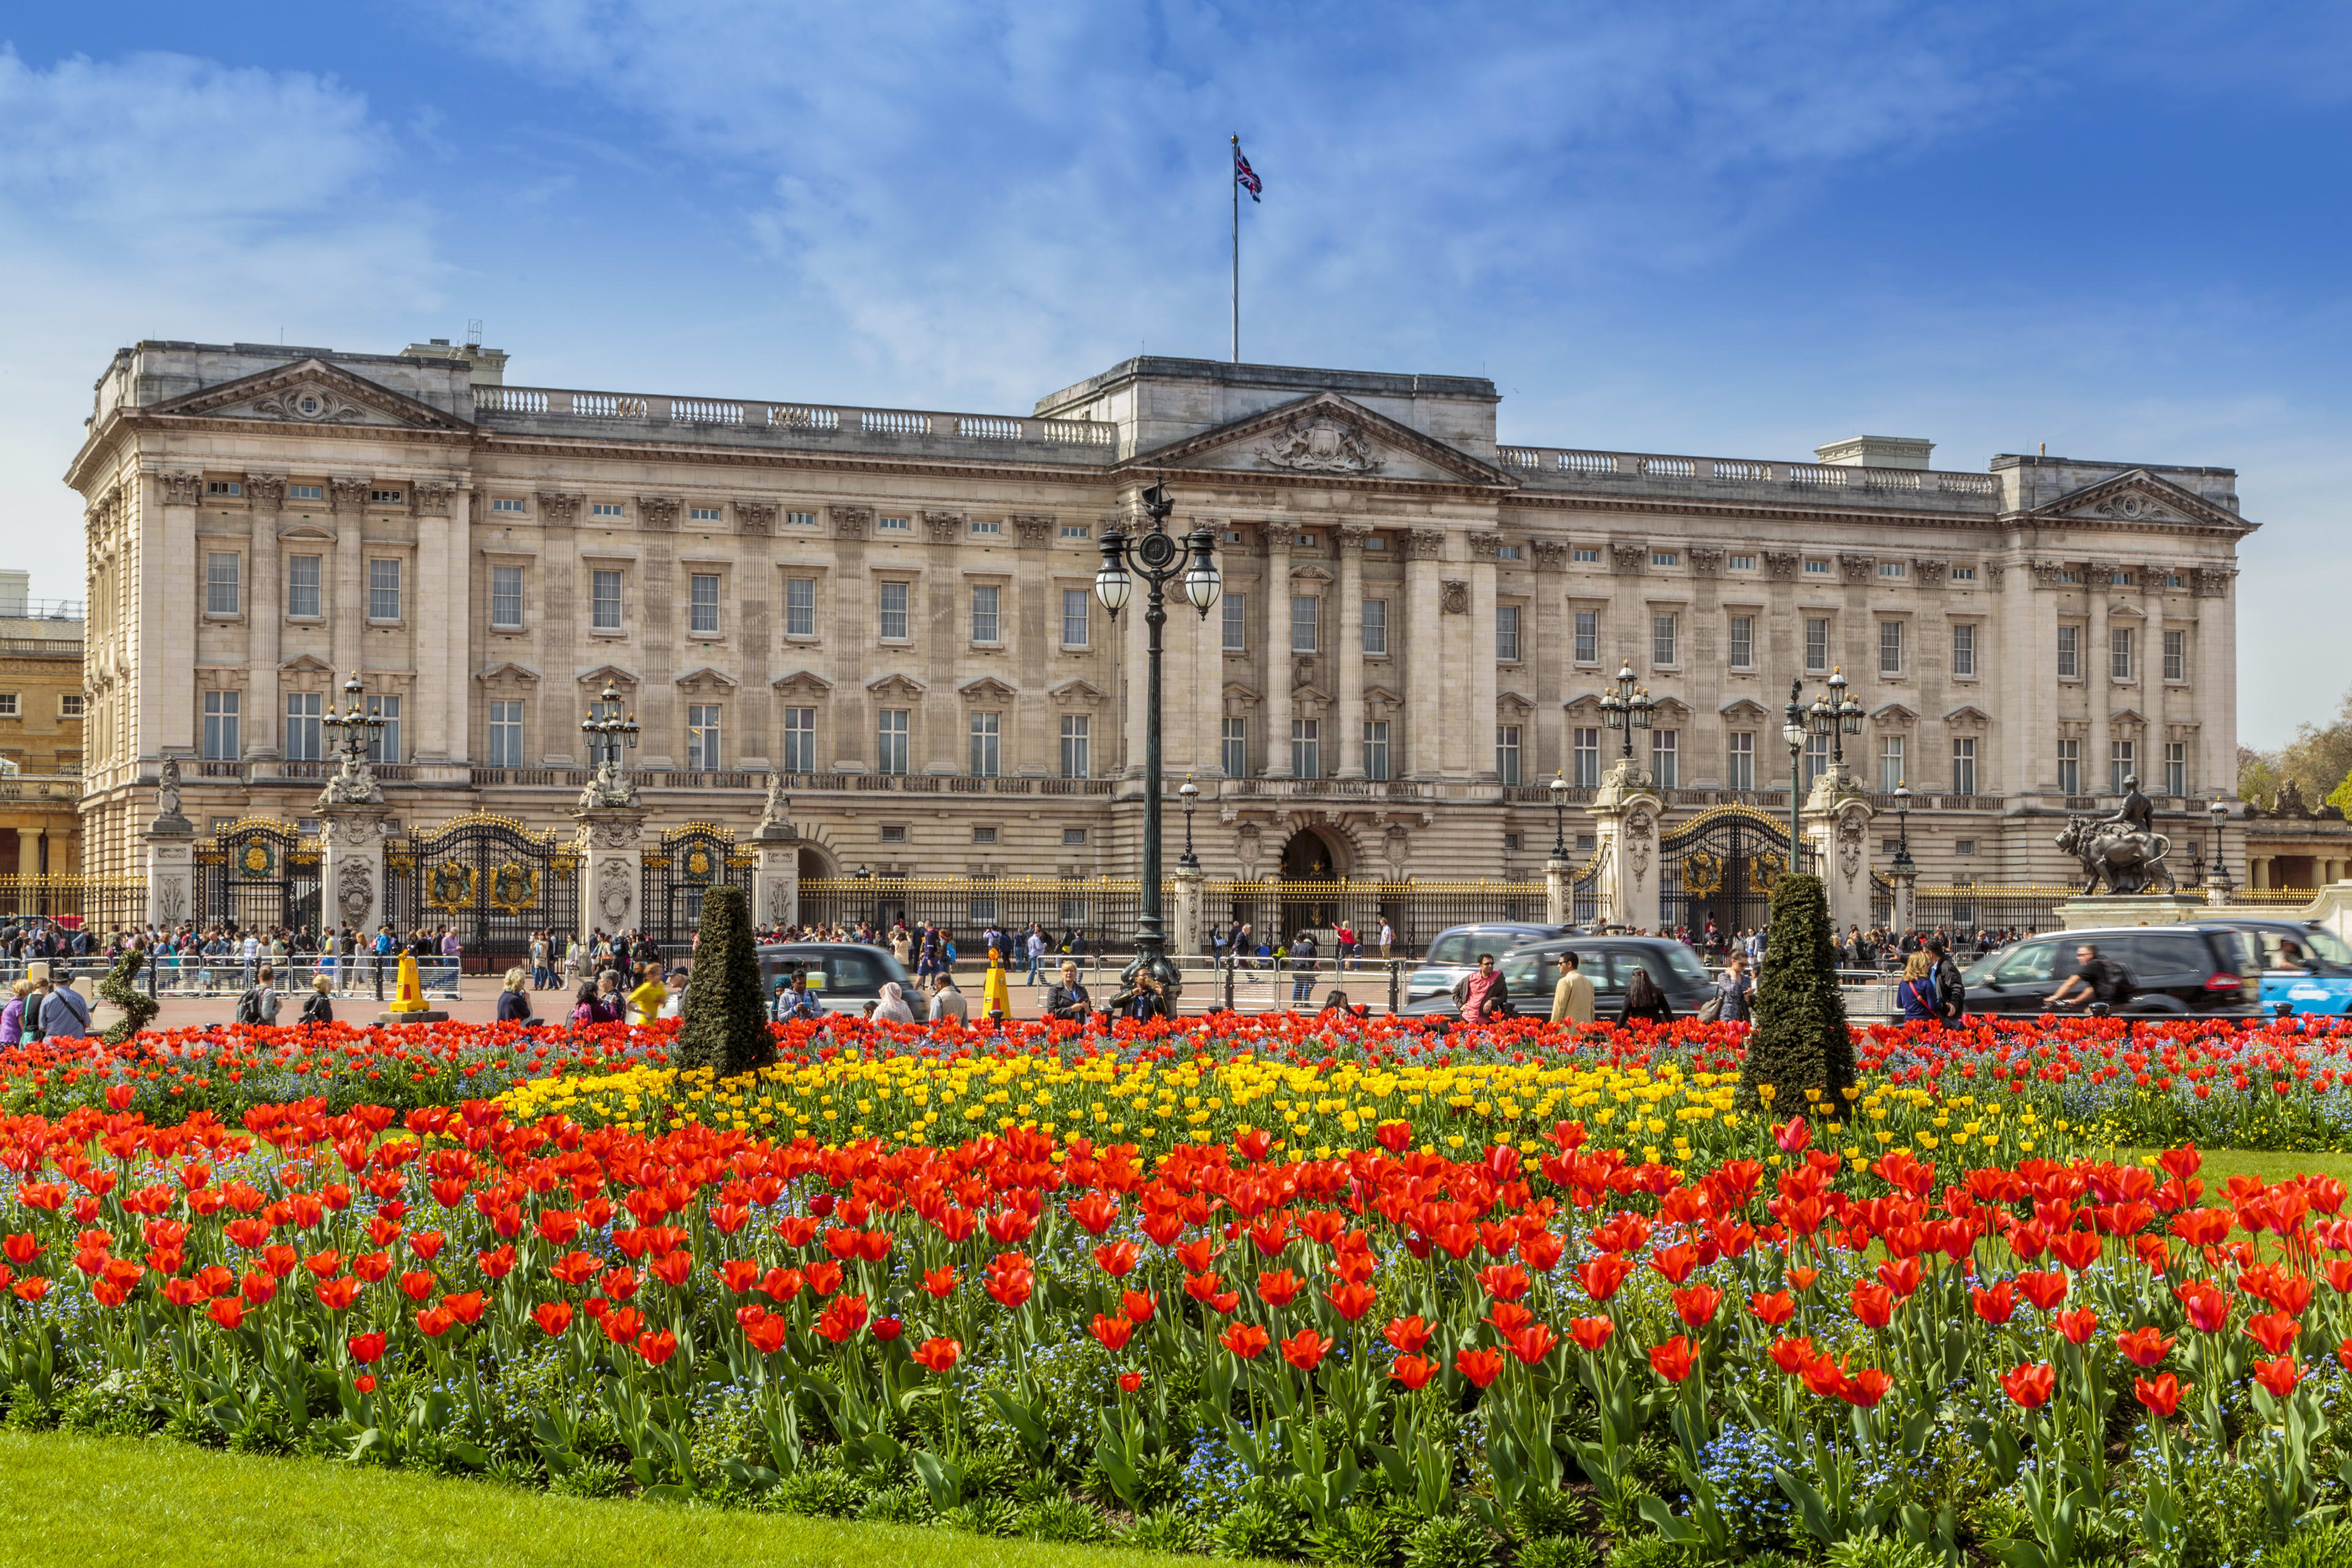 Fascinating Buckingham Palace facts | The London Pass®